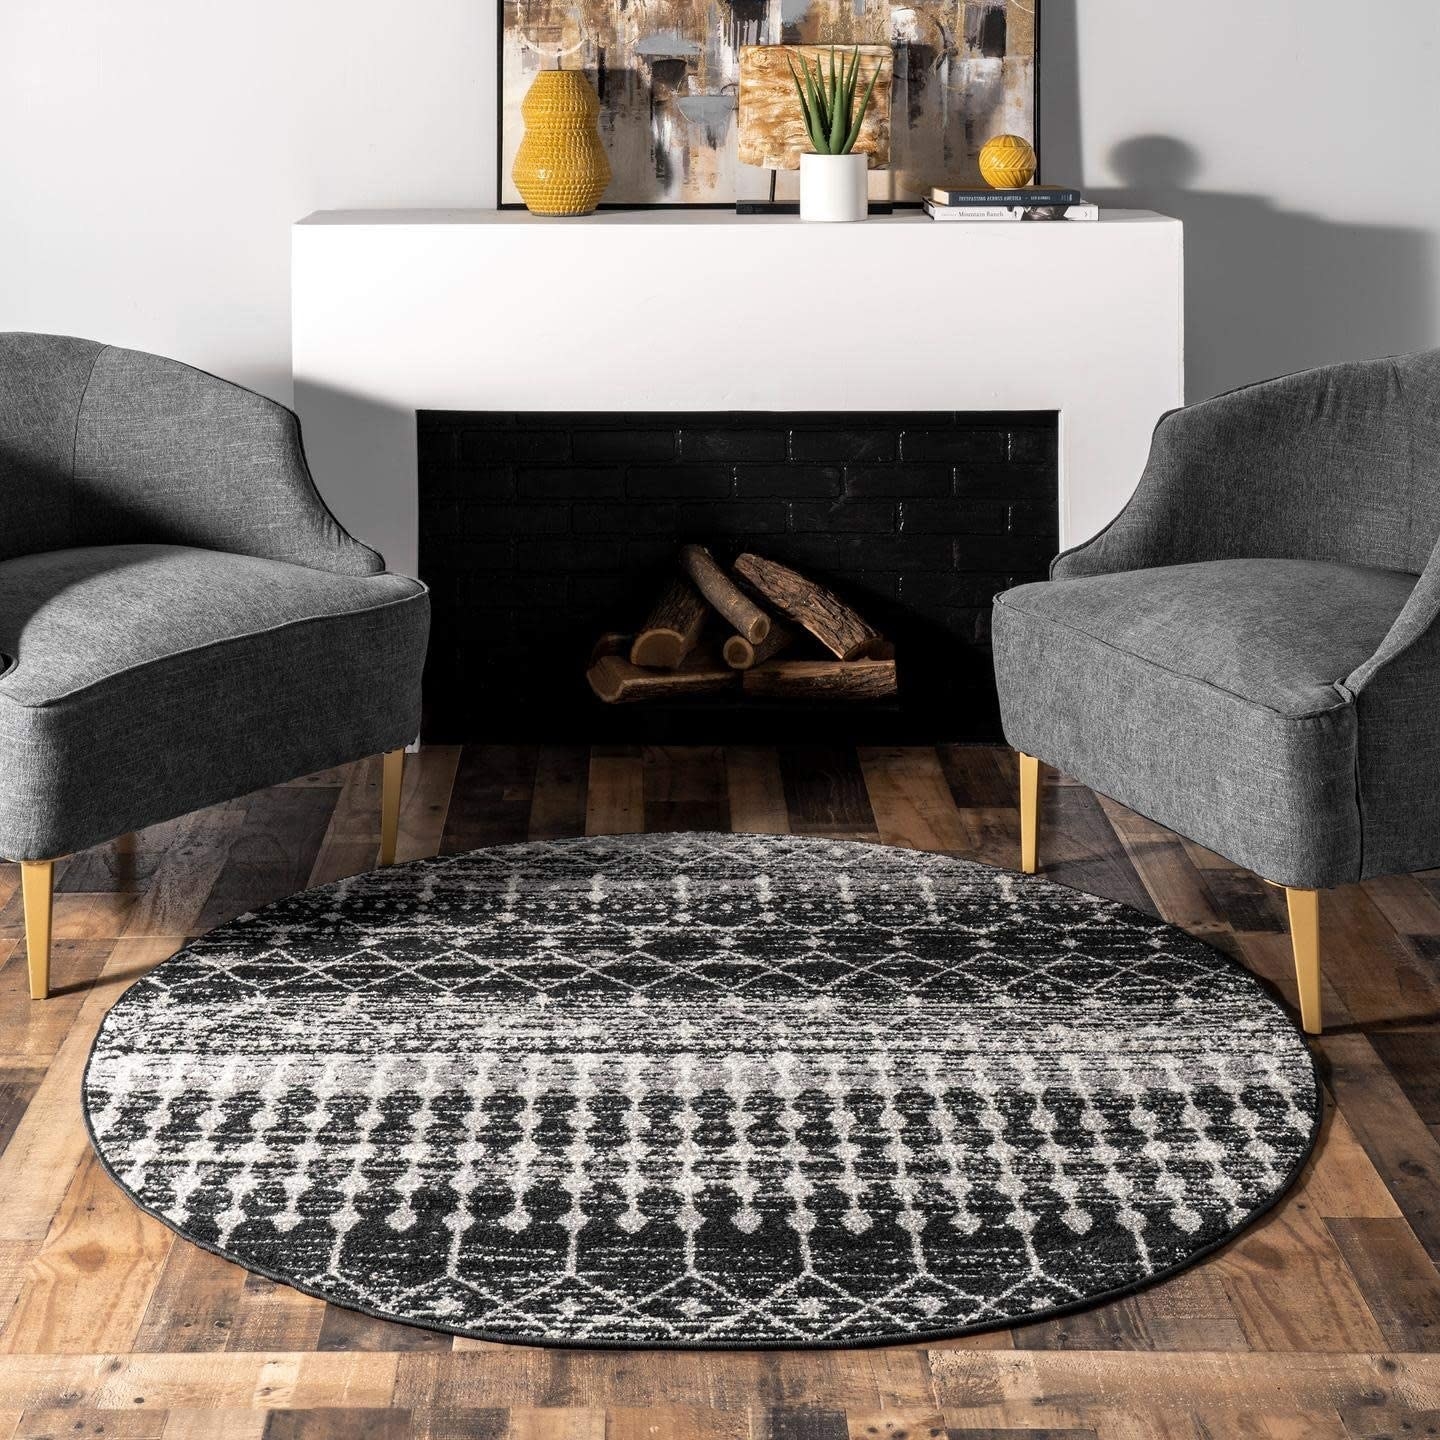 the round rug in black, white and gray with geometric shapes and line designs on it